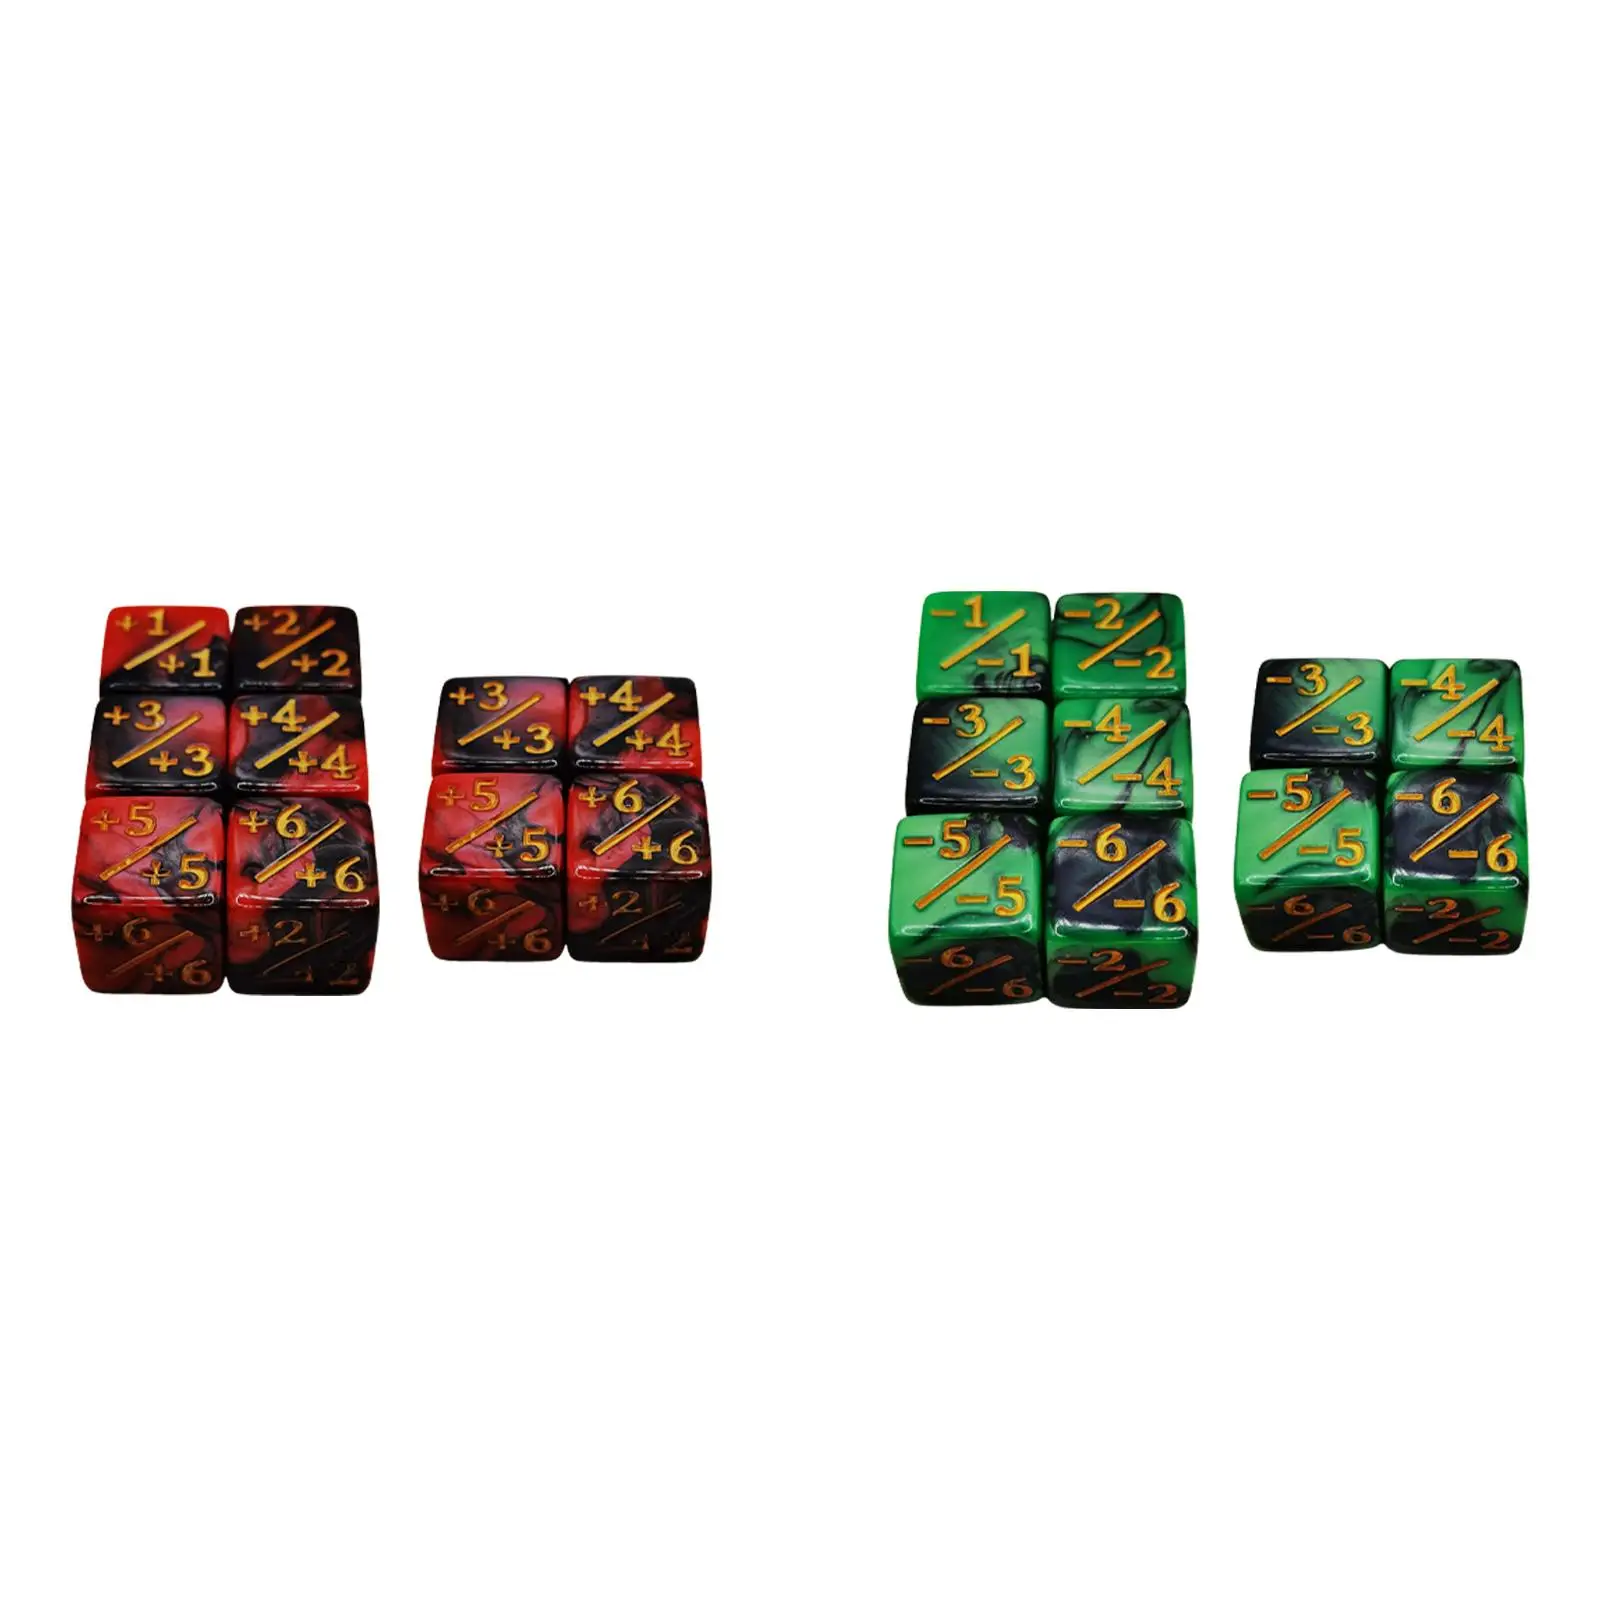 10x Counter Dice Six Sided Dice Set Token Dice Math Teaching Dice for Party Supplies